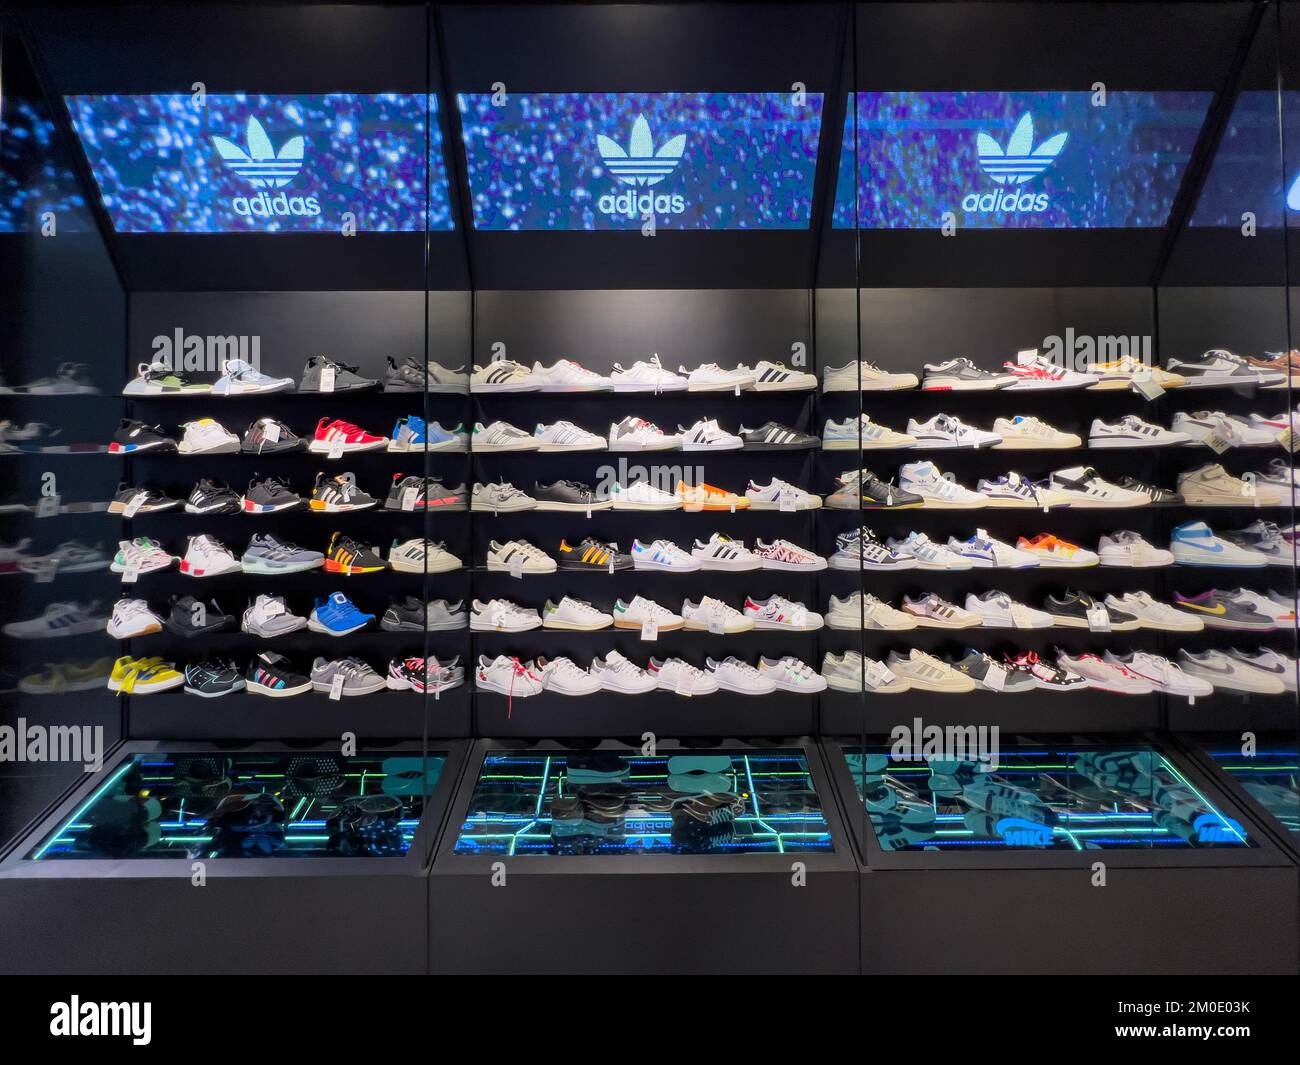 Inside a sneaker shop, shelves displaying Adidas latest shoes models for customers to select. Stock Photo